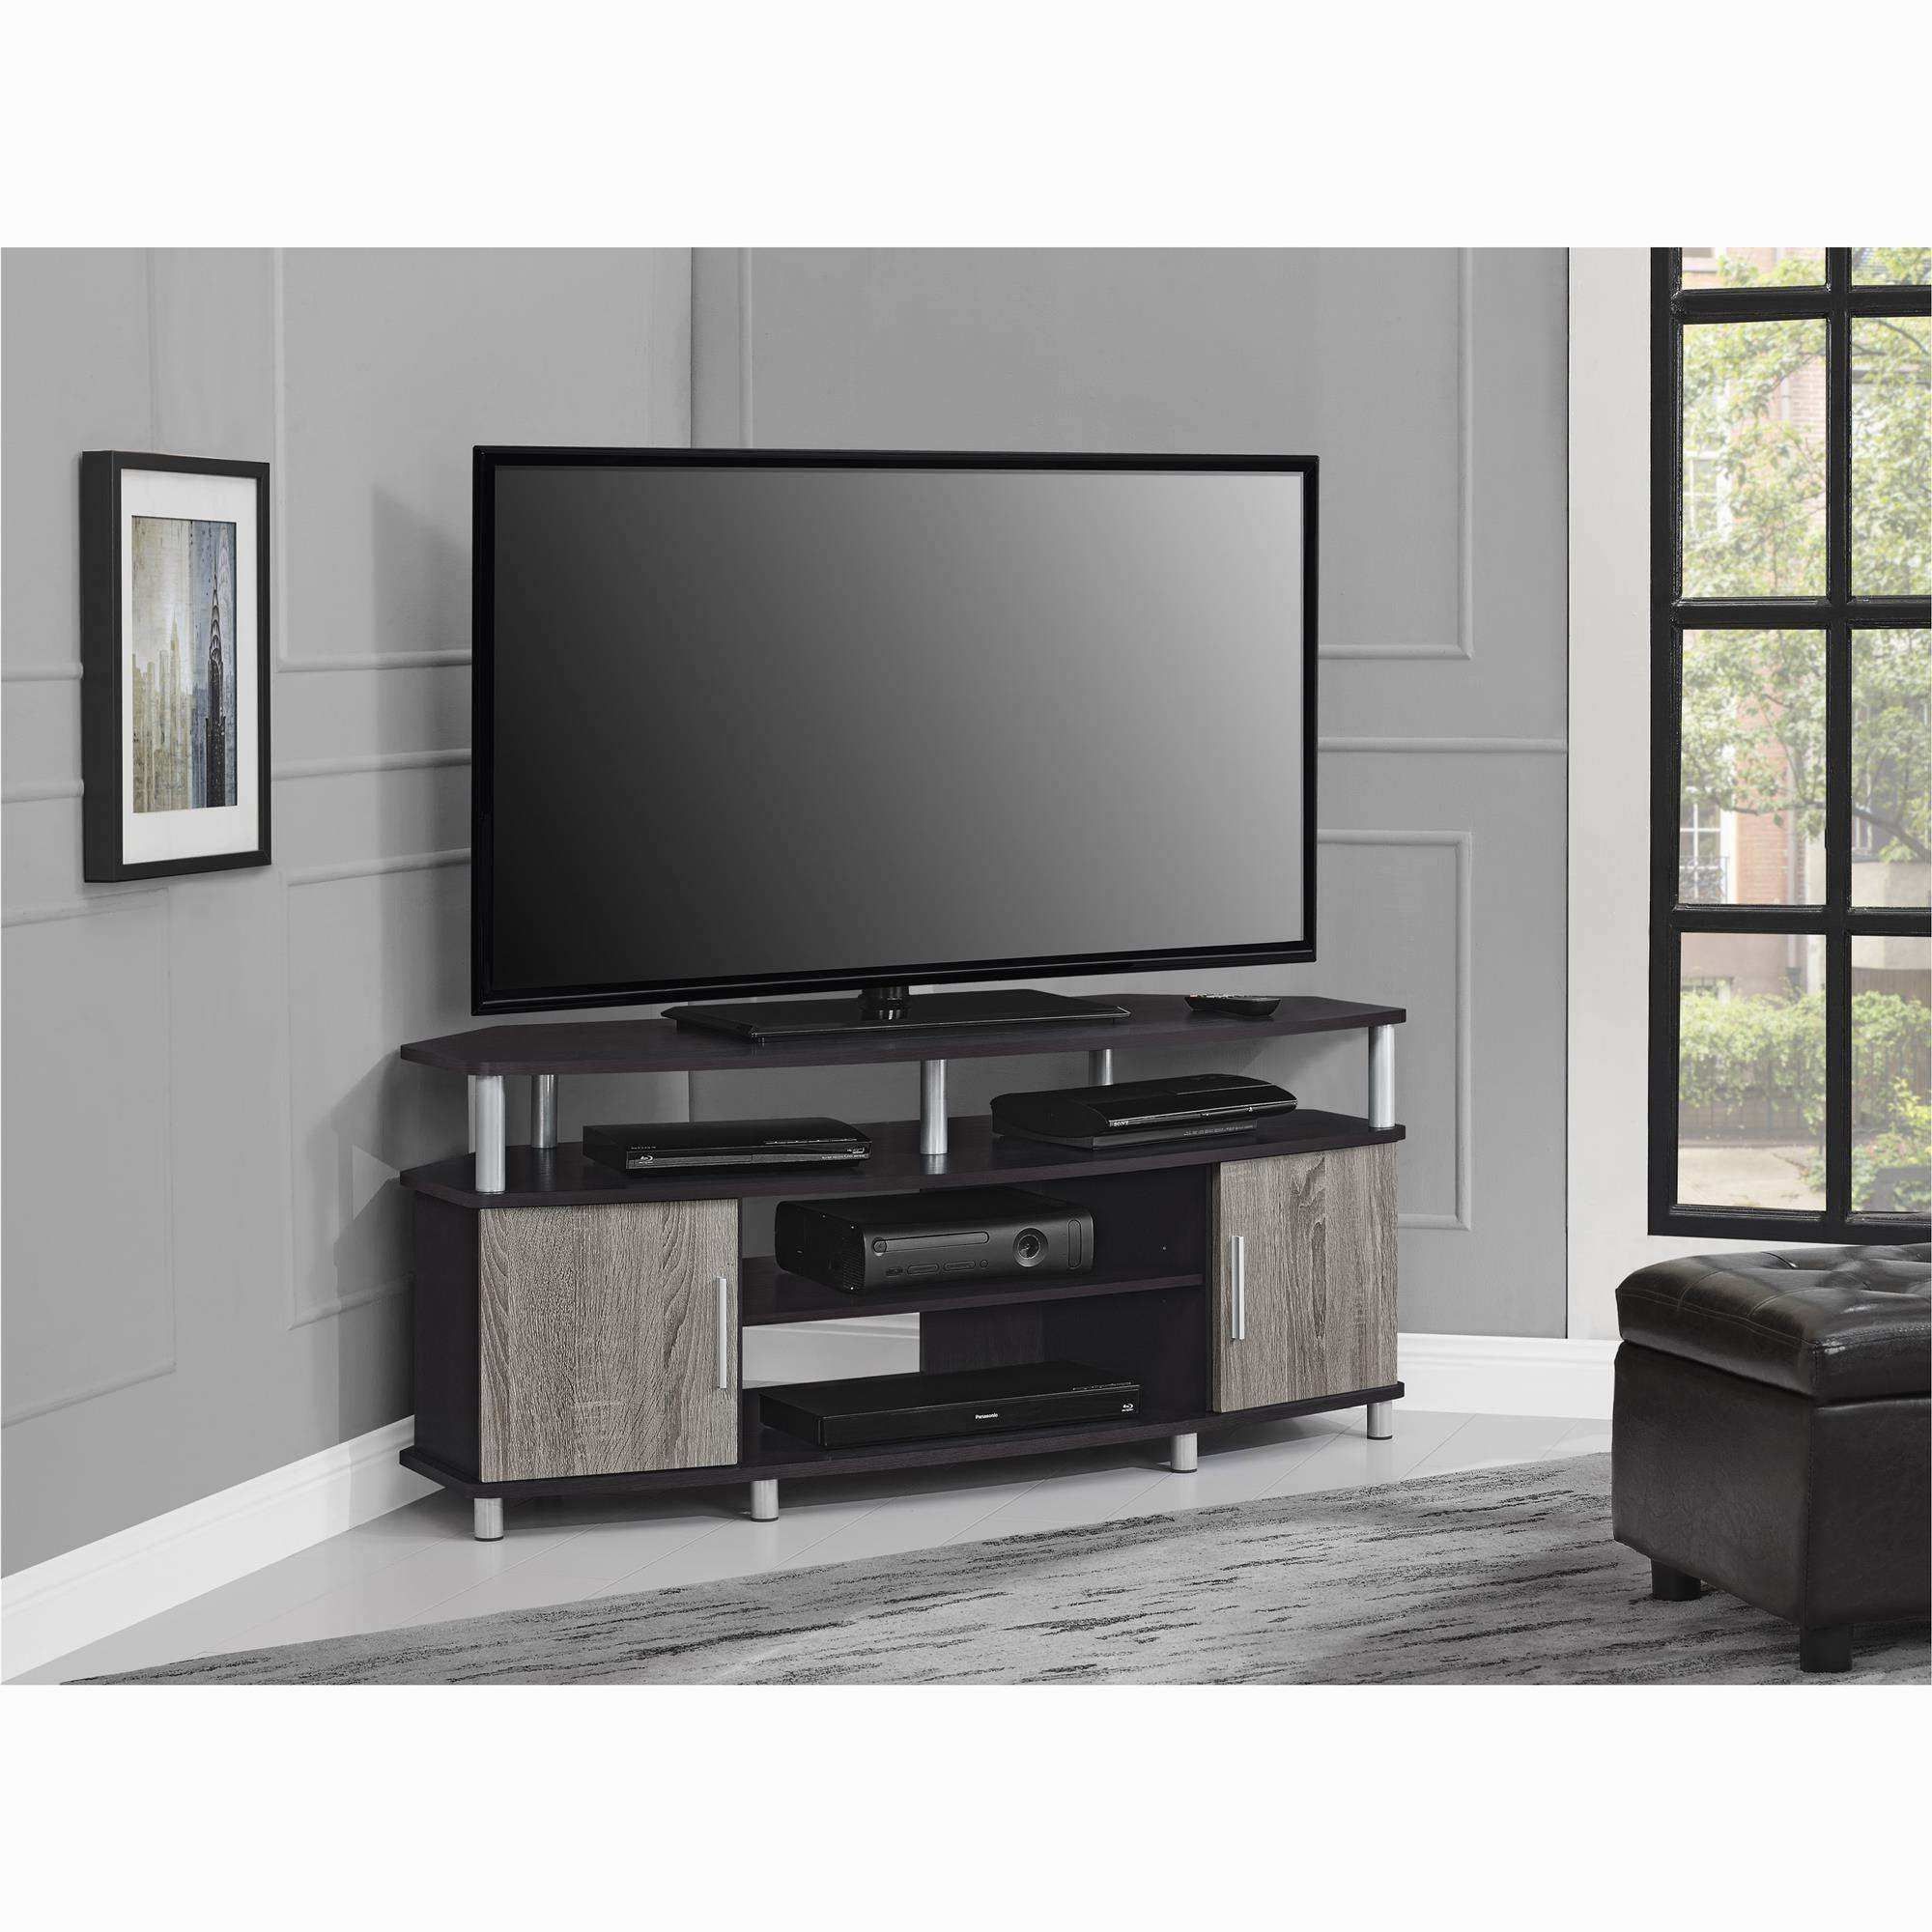 Corner Tv Cabinets For Flat Screens With Latest Absolutely Ideas 50 Corner Tv Stand Pedestal Stands For Flat Screens (View 13 of 20)